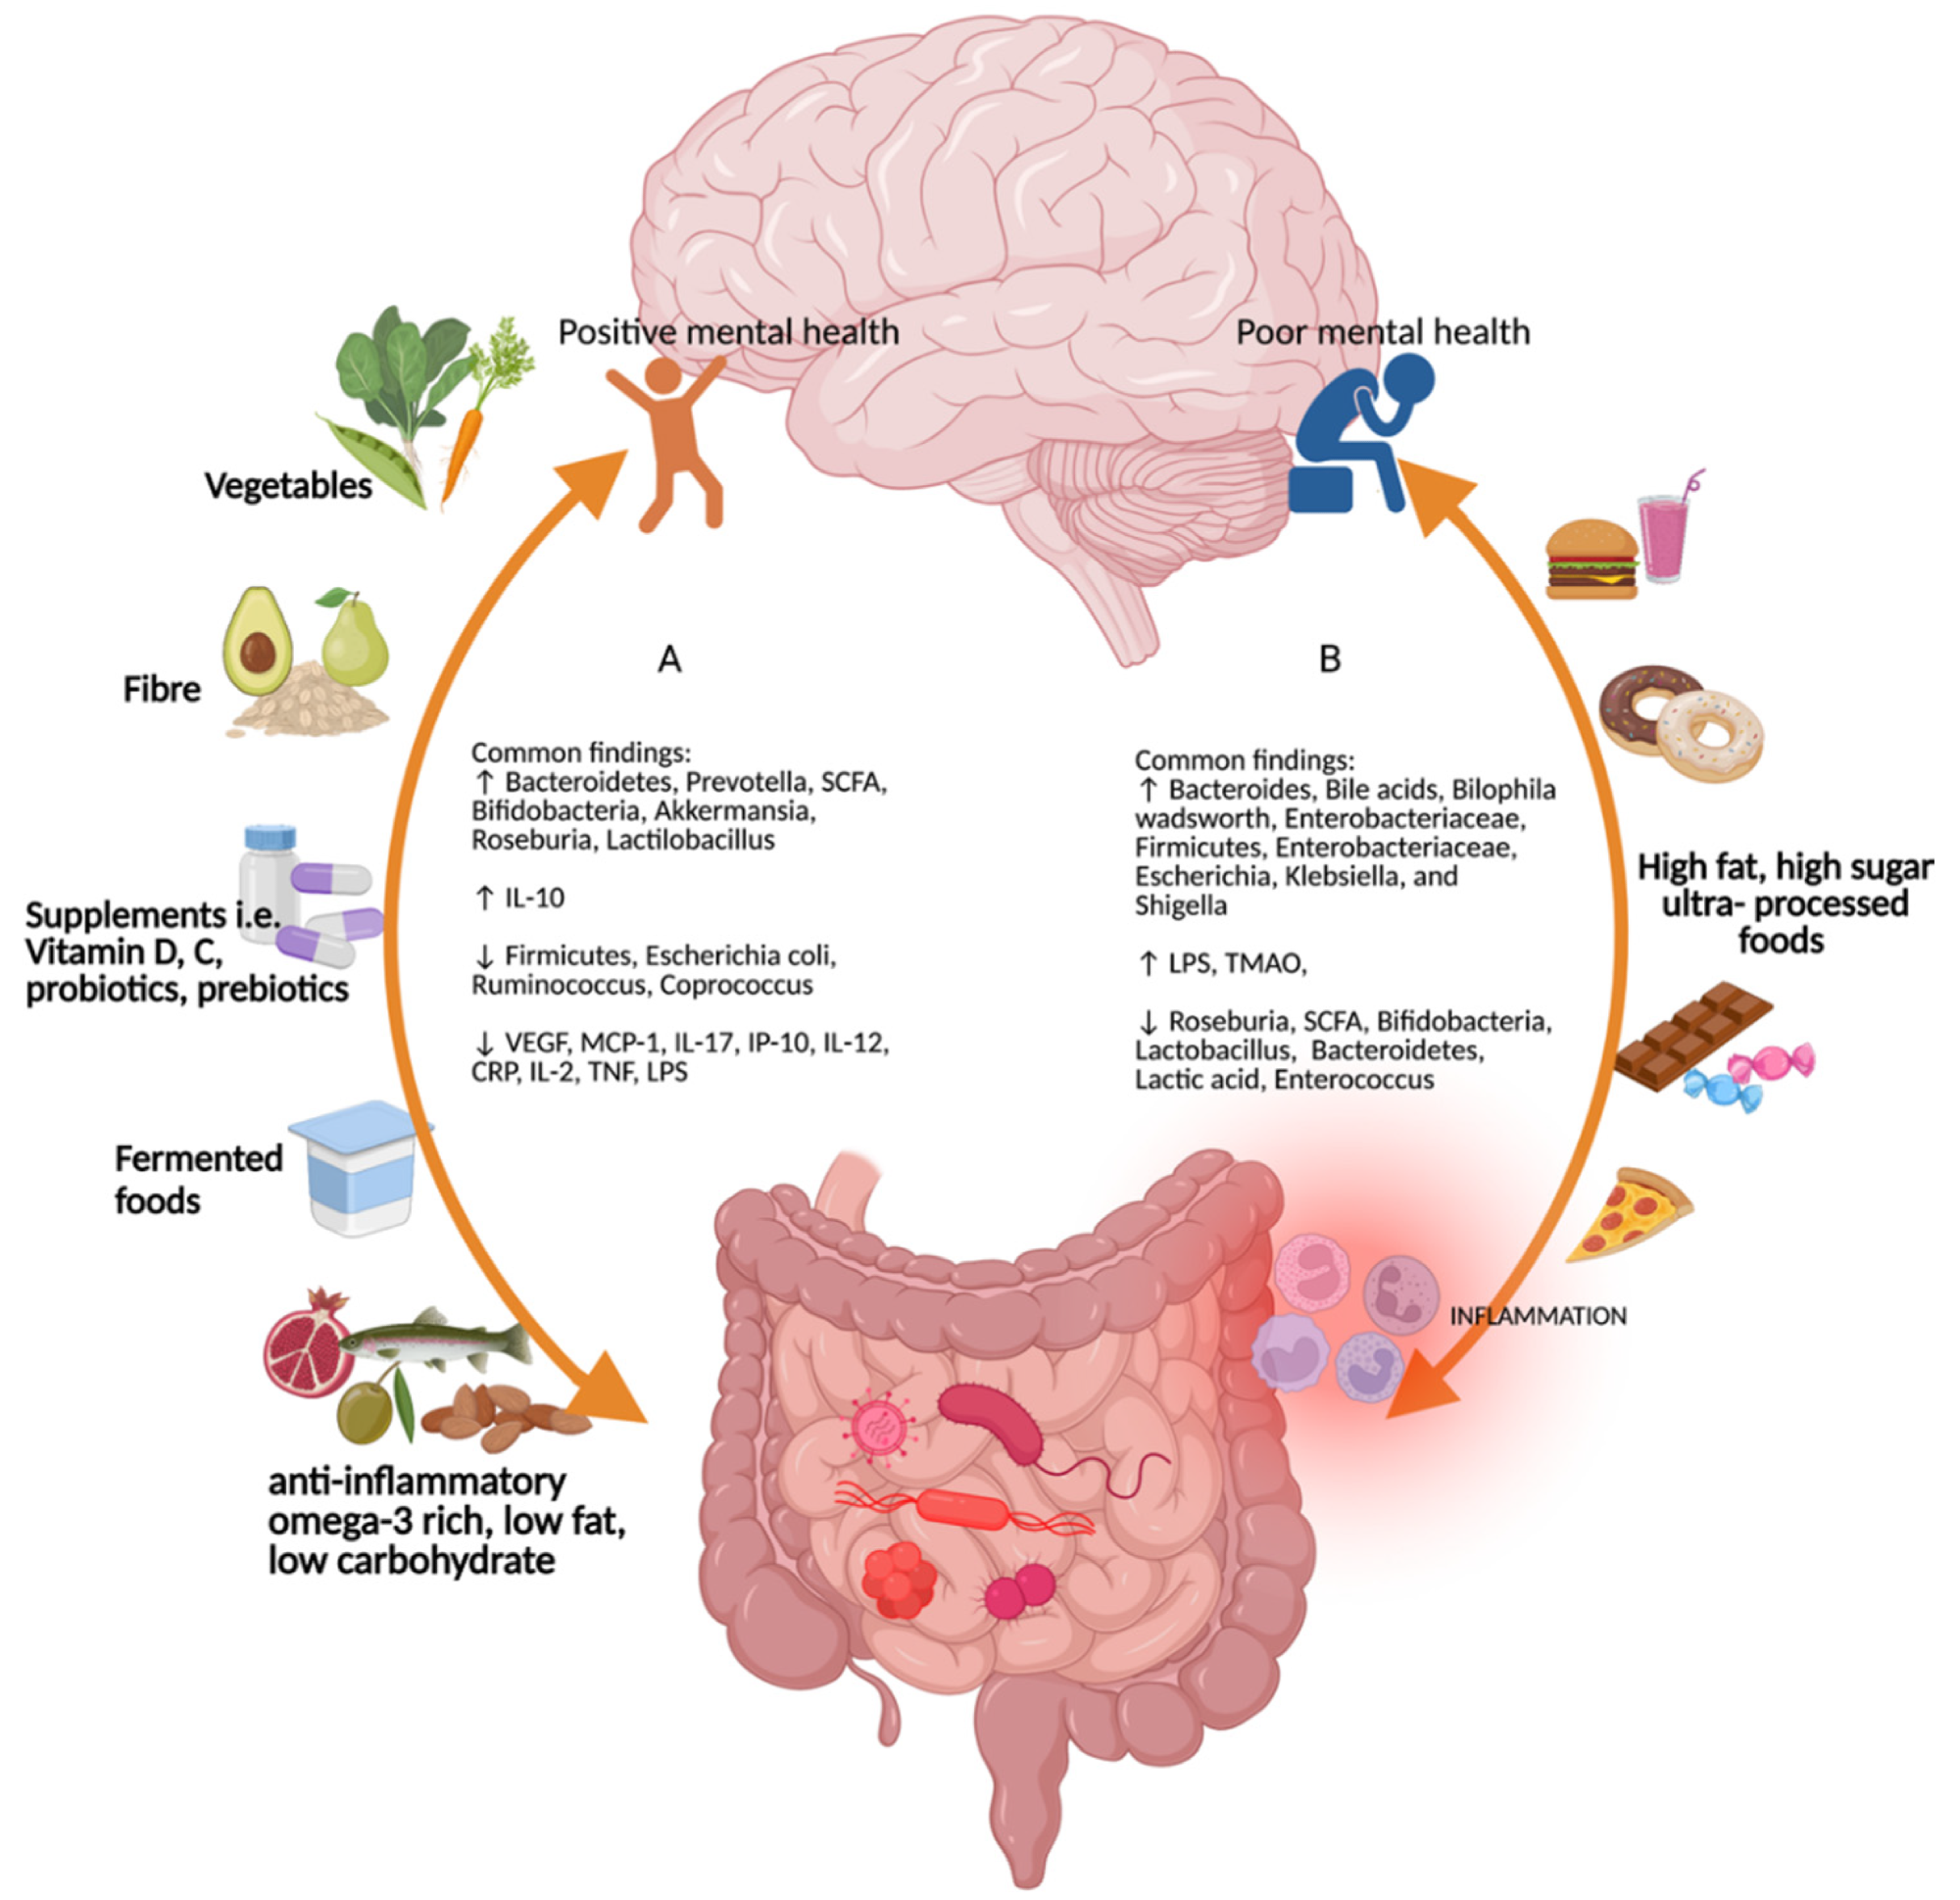 Common findings for different types of diets on the gut-brain-microbiome axis.  (A) Diets rich in vegetables, fiber, micronutrients such as vitamins D and C, probiotics and prebiotics, fermented foods, anti-inflammatory foods rich in omega-3s, low in fat and low in carbohydrates promote positive mental health and increase Bacteroidetes, Prevotella, short-chain fatty acids, Bifodobacteria, Akkermansia, Roseburia, Lactilobacillus and interleukin (IL) -10, and decreases in Firmicutes, Escherichia coli, Ruminococcus, Coprococcus, vascular endothelial growth factor, monocyte protein-1 , gamma-induced protein interferon 10, IL-17, IL-12, c-reactive protein, IL-2, tumor necrosis factor and lipopolysaccharide.  (B) High-fat, high-sugar and ultra-processed foods increase Bacteroides, bile acids, Bilophila wadsworth, Enterobacteriaceae, Firmicutes, Enterobacteriaceae, Escherichia, Klebsiella and Shigella.  Figure made with Biorender (accessed on 29 April 2022).